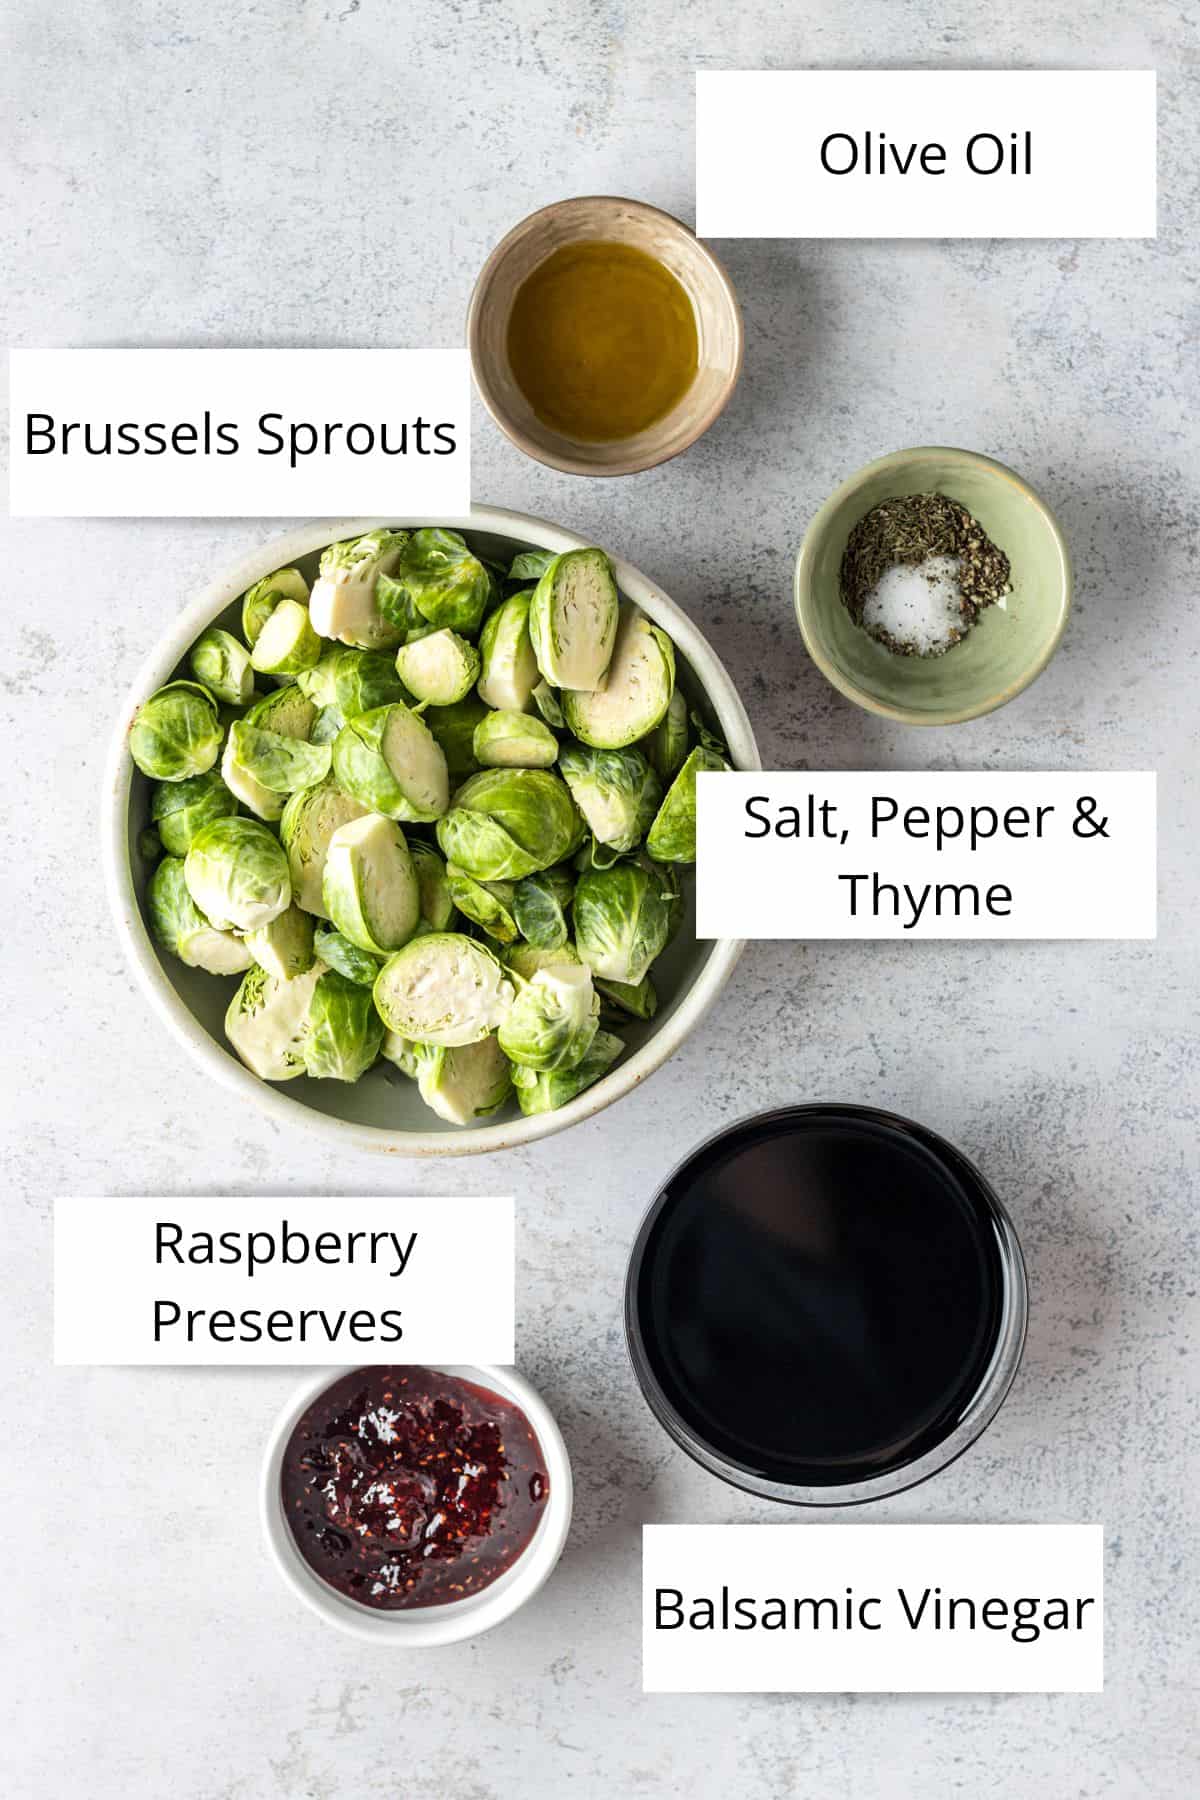 A while bowl with halved Brussels sprouts, a pinch bowl of olive oil, a pinch bowl of spices, a small while bowl with raspberry preserves and a clear bowl with balsamic vinegar.